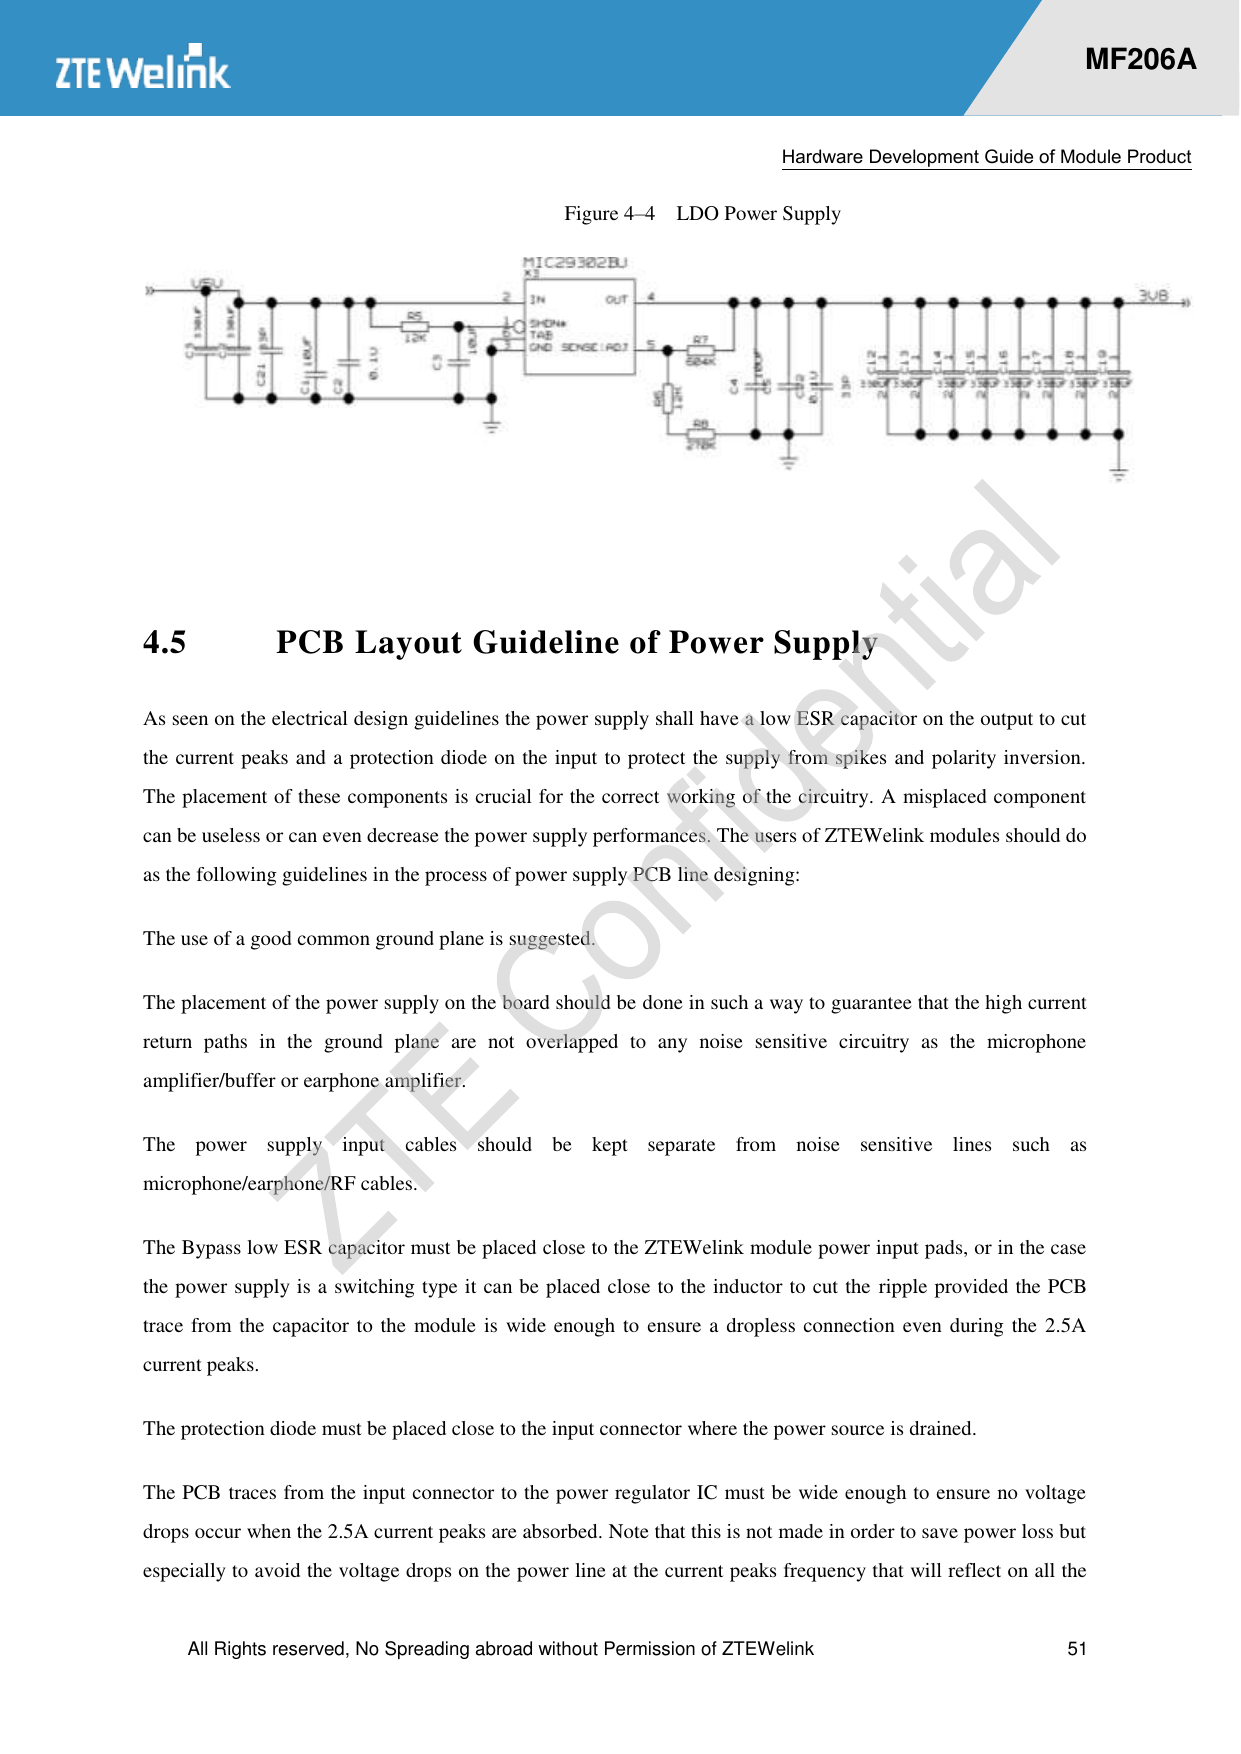  Hardware Development Guide of Module Product  All Rights reserved, No Spreading abroad without Permission of ZTEWelink  51    MF206A Figure 4–4  LDO Power Supply   4.5 PCB Layout Guideline of Power Supply As seen on the electrical design guidelines the power supply shall have a low ESR capacitor on the output to cut the current peaks and a protection diode on the input to protect the supply from spikes and polarity inversion. The placement of these components is crucial for the correct working of the circuitry. A misplaced component can be useless or can even decrease the power supply performances. The users of ZTEWelink modules should do as the following guidelines in the process of power supply PCB line designing:   The use of a good common ground plane is suggested.   The placement of the power supply on the board should be done in such a way to guarantee that the high current return  paths  in  the  ground  plane  are  not  overlapped  to  any  noise  sensitive  circuitry  as  the  microphone amplifier/buffer or earphone amplifier. The  power  supply  input  cables  should  be  kept  separate  from  noise  sensitive  lines  such  as microphone/earphone/RF cables. The Bypass low ESR capacitor must be placed close to the ZTEWelink module power input pads, or in the case the power supply is a switching type it can be placed close to the inductor to cut the ripple provided the PCB trace from the capacitor to the  module is wide enough to ensure a dropless connection even during the 2.5A current peaks.   The protection diode must be placed close to the input connector where the power source is drained.   The PCB traces from the input connector to the power regulator IC must be wide enough to ensure no voltage drops occur when the 2.5A current peaks are absorbed. Note that this is not made in order to save power loss but especially to avoid the voltage drops on the power line at the current peaks frequency that will reflect on all the 